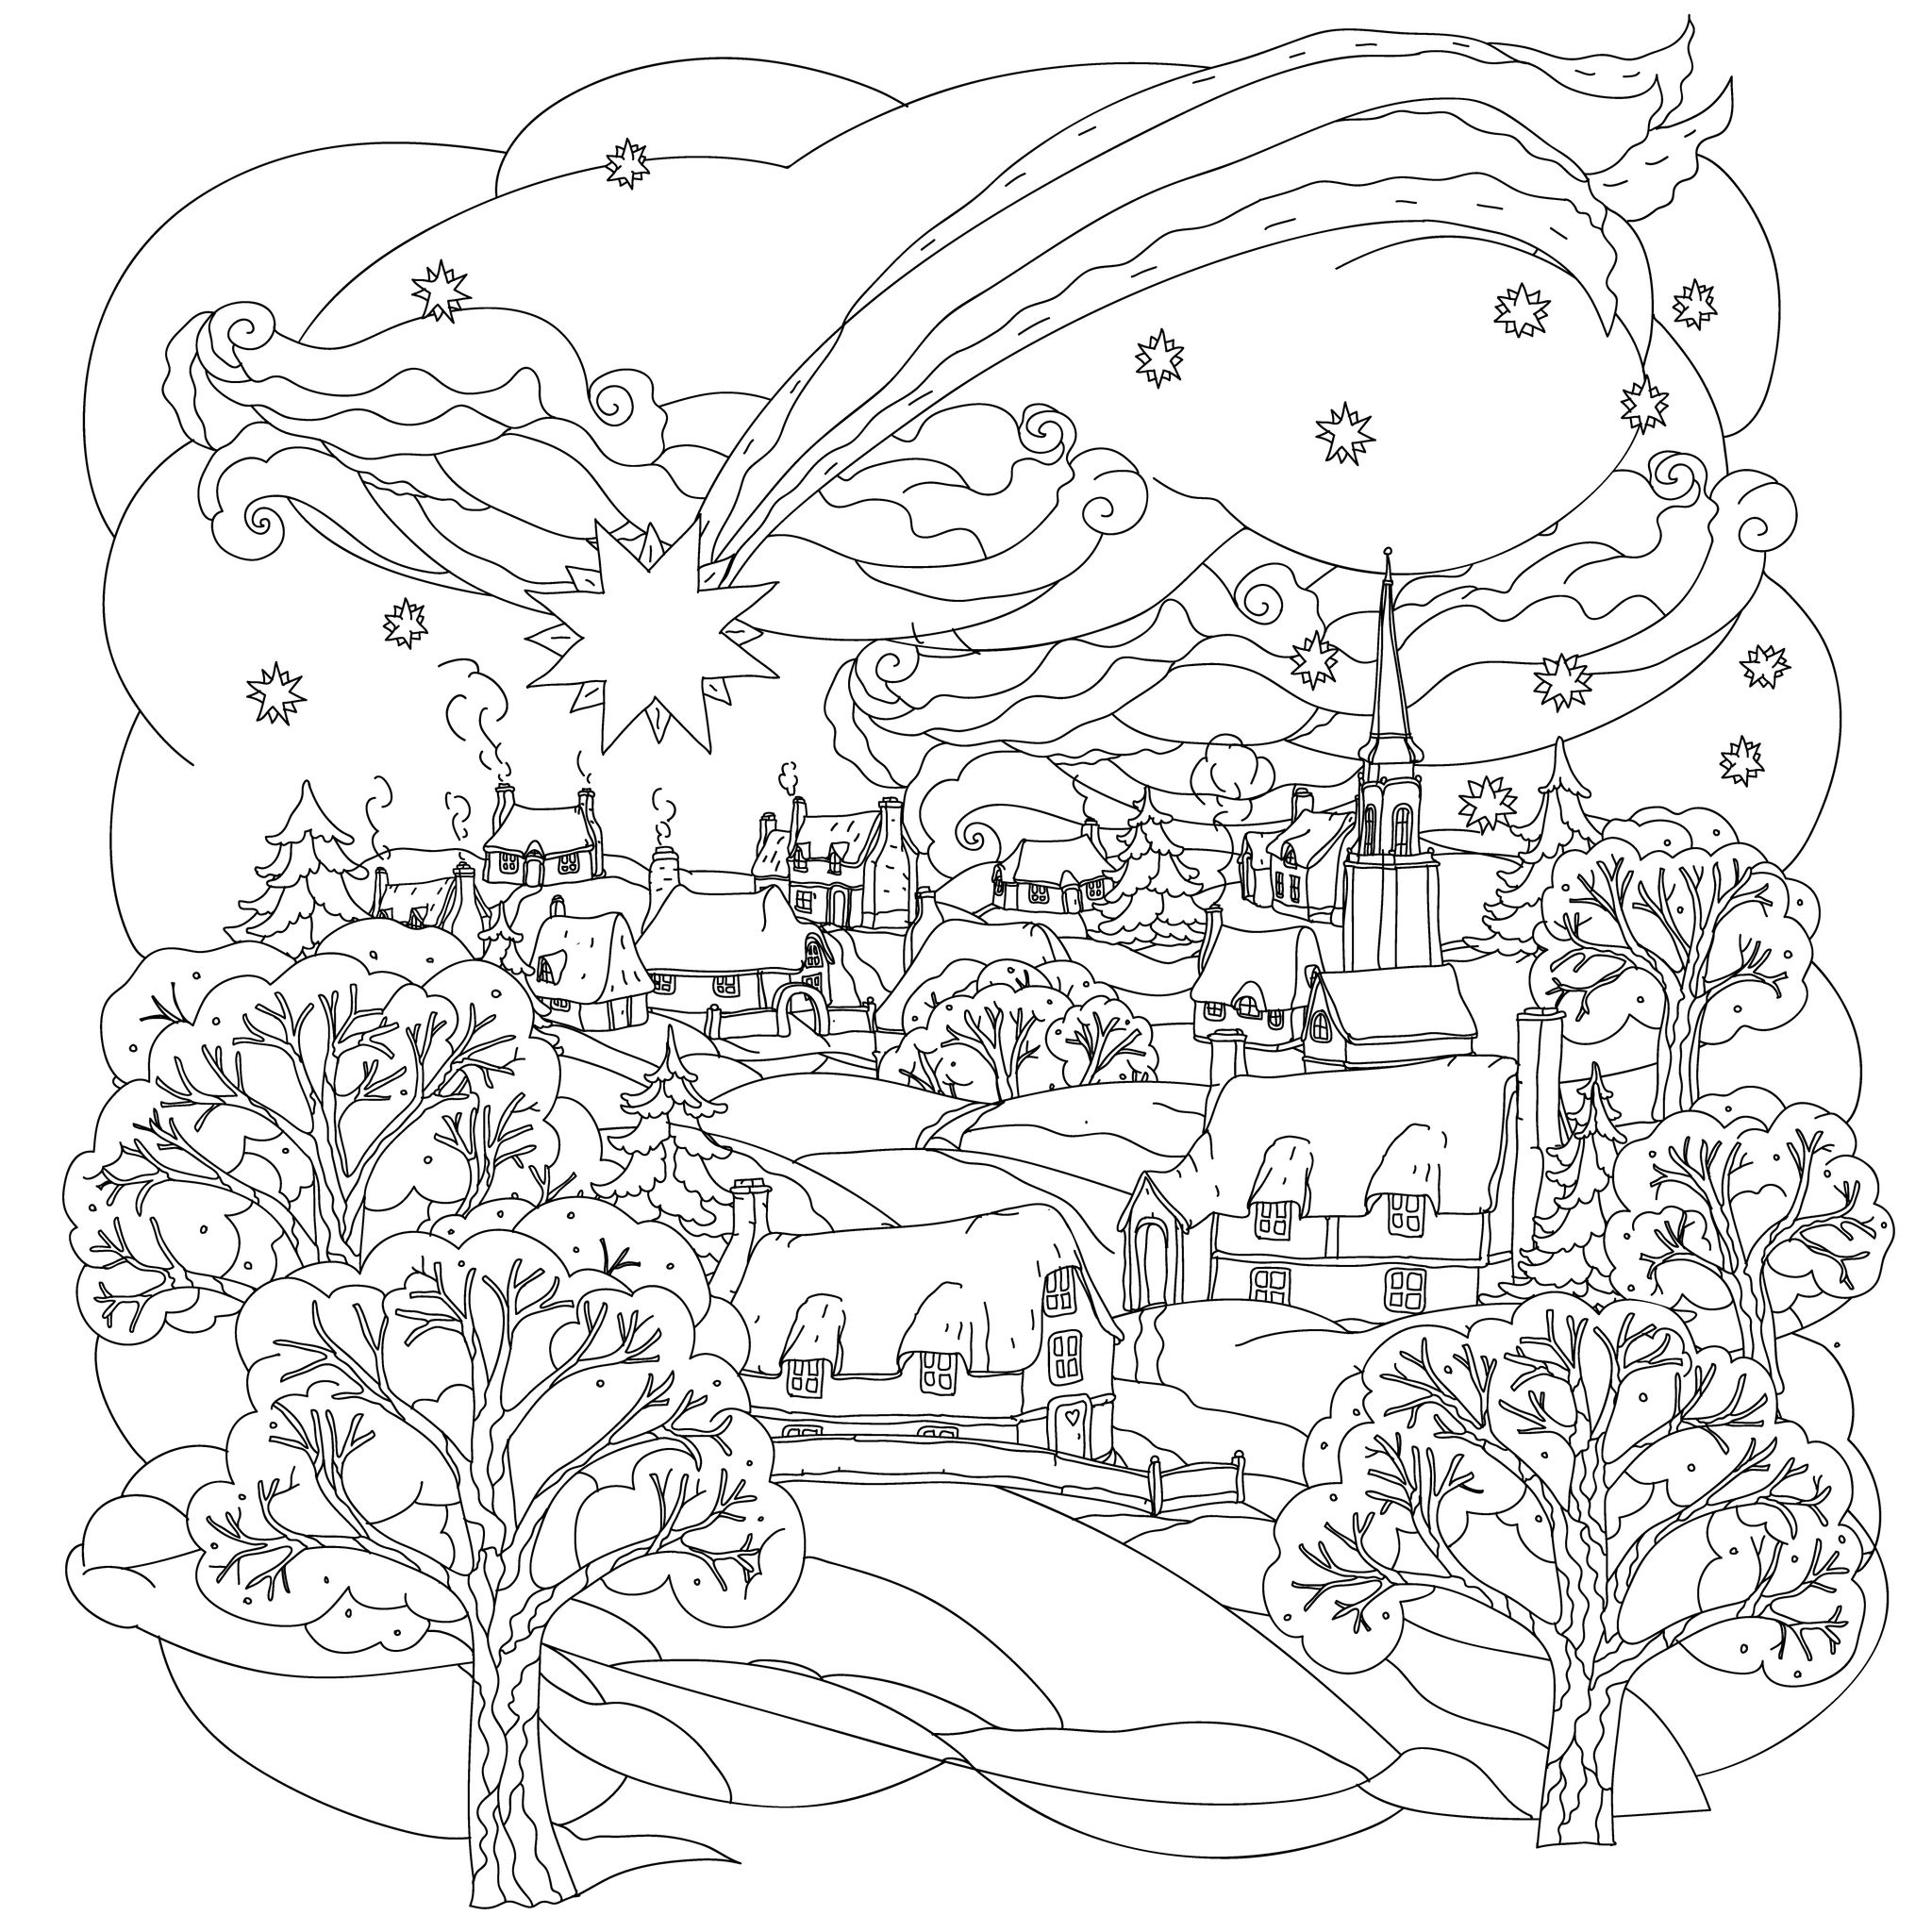 Christmas Coloring Pages For Adults Best Coloring Pages Effy Moom Free Coloring Picture wallpaper give a chance to color on the wall without getting in trouble! Fill the walls of your home or office with stress-relieving [effymoom.blogspot.com]